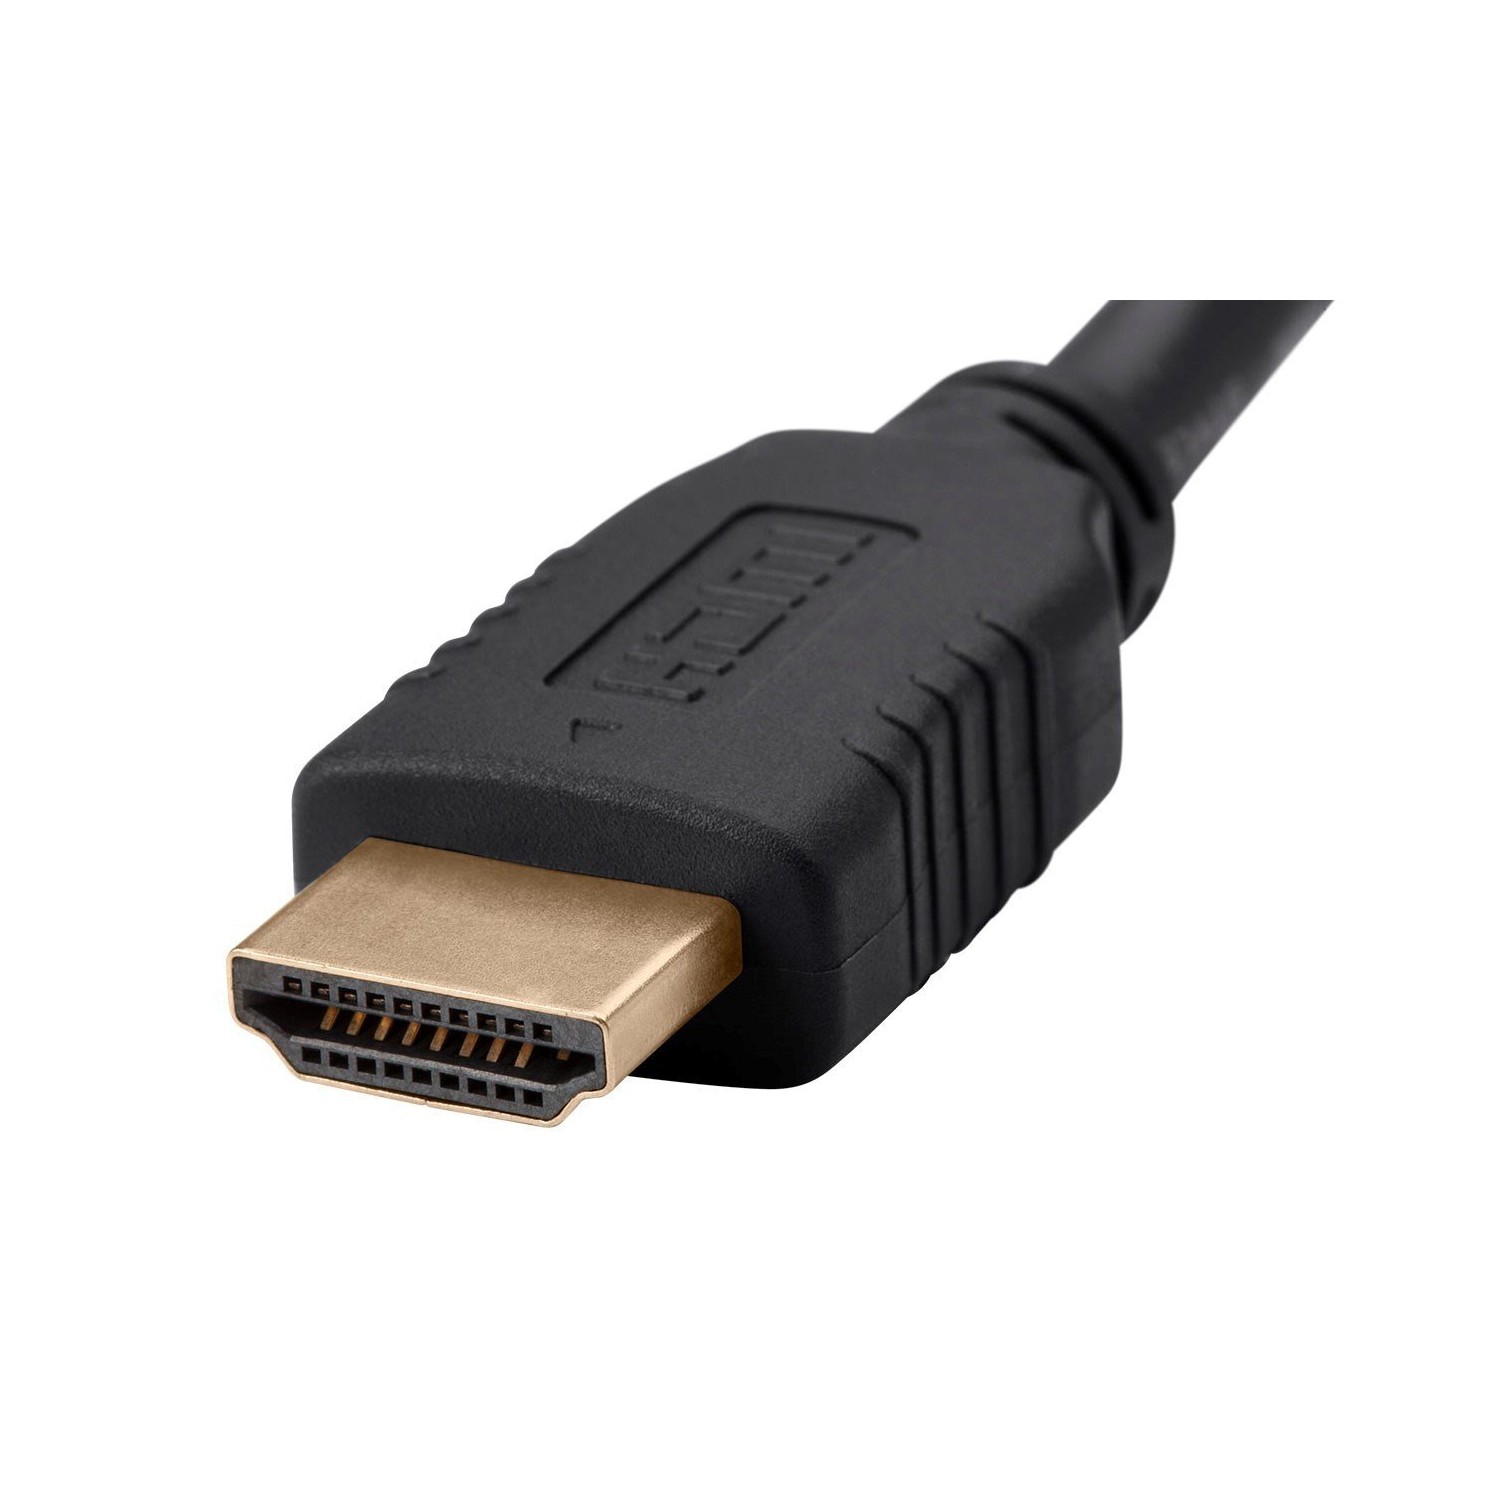 Monoprice 102529 15-Feet 28AWG Standard HDMI Cable with Ferrite